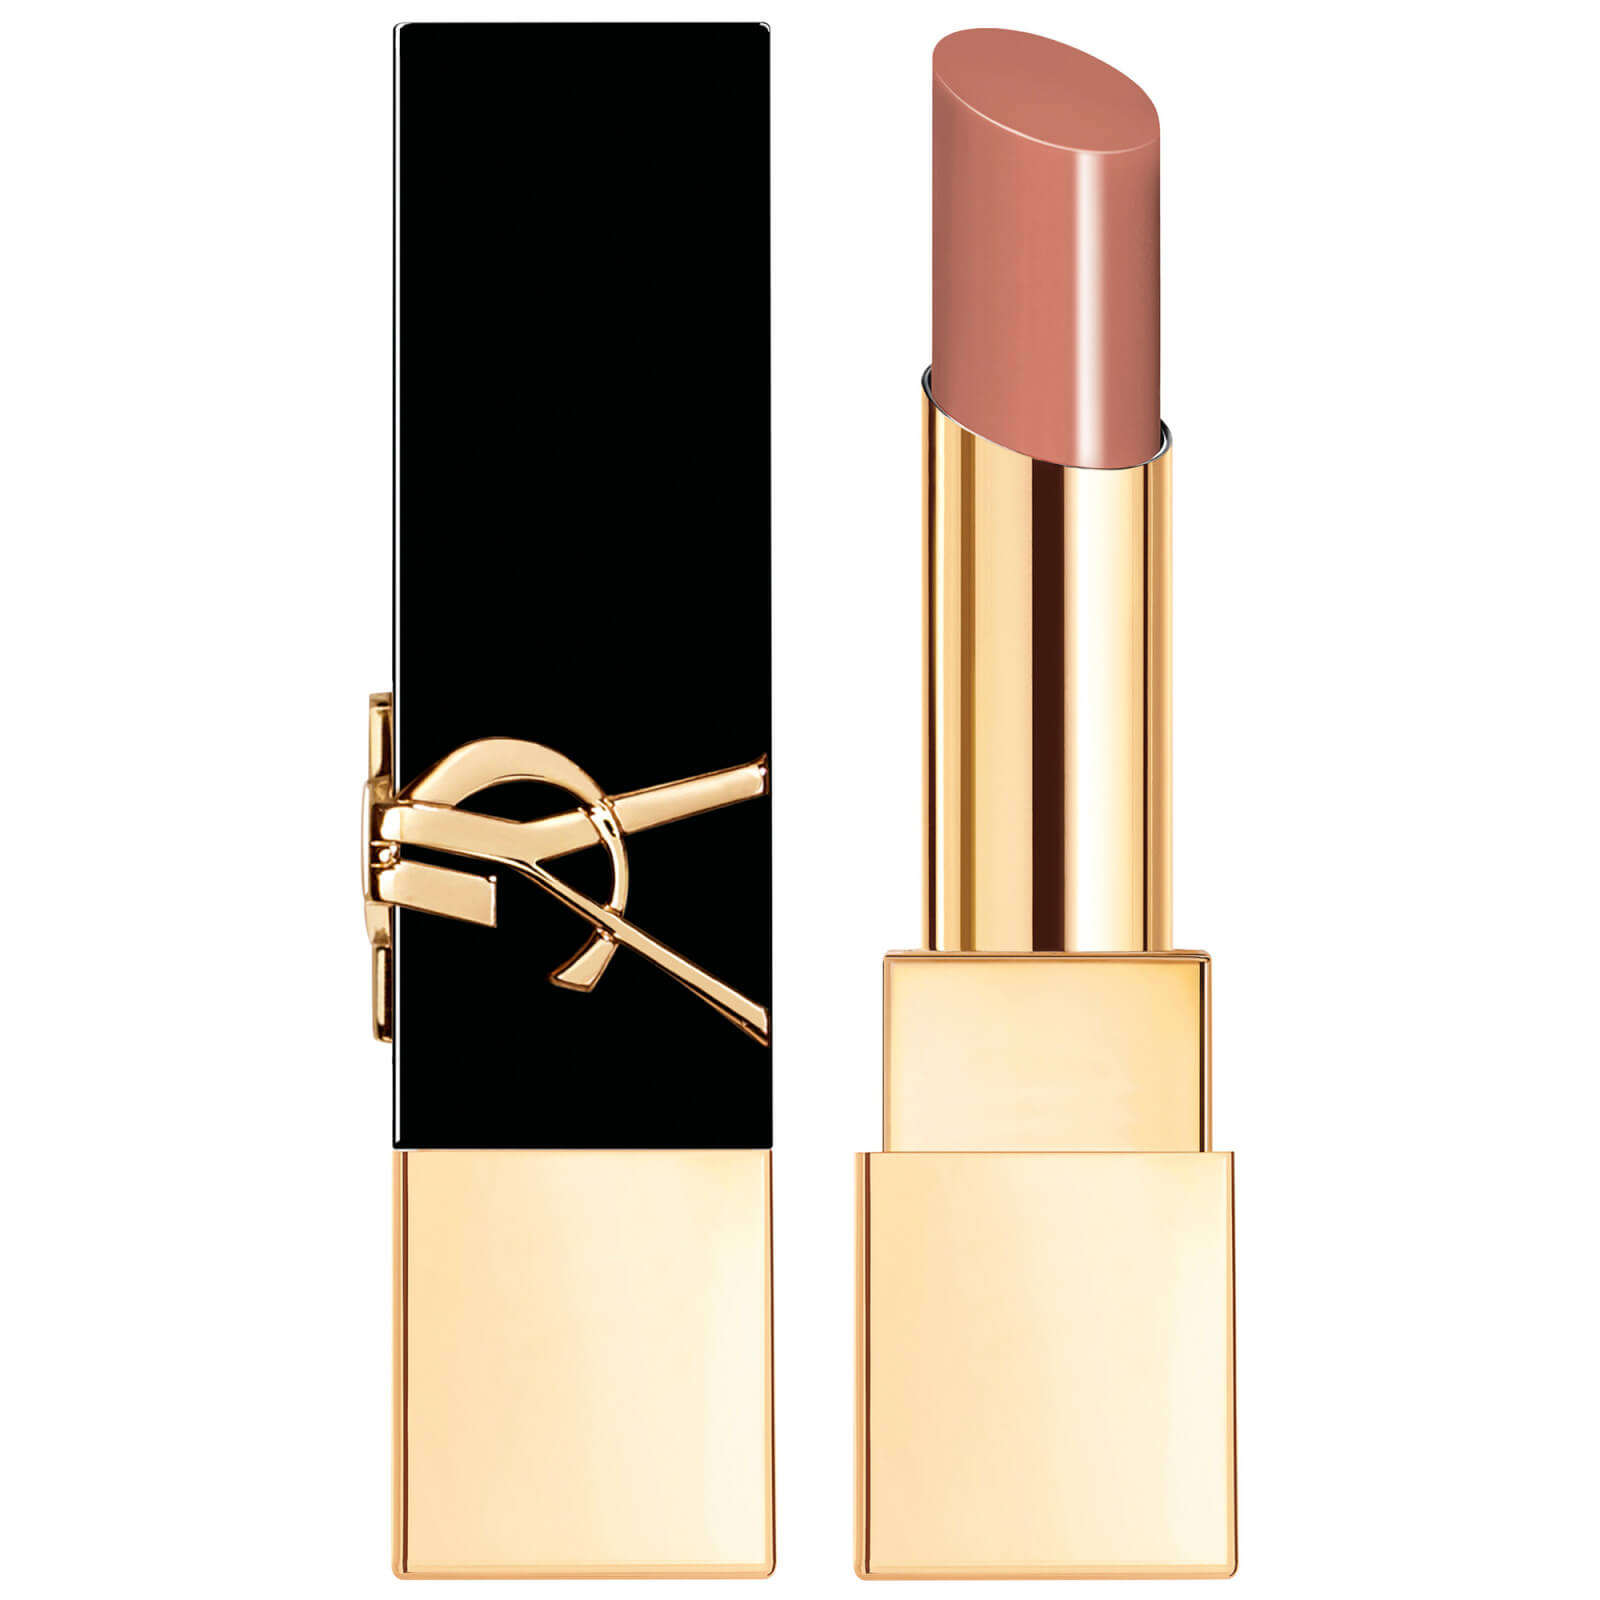 Yves Saint Laurent Rouge Pur Couture The Bold Lipstick 3g (Various Shades) - Nude N13